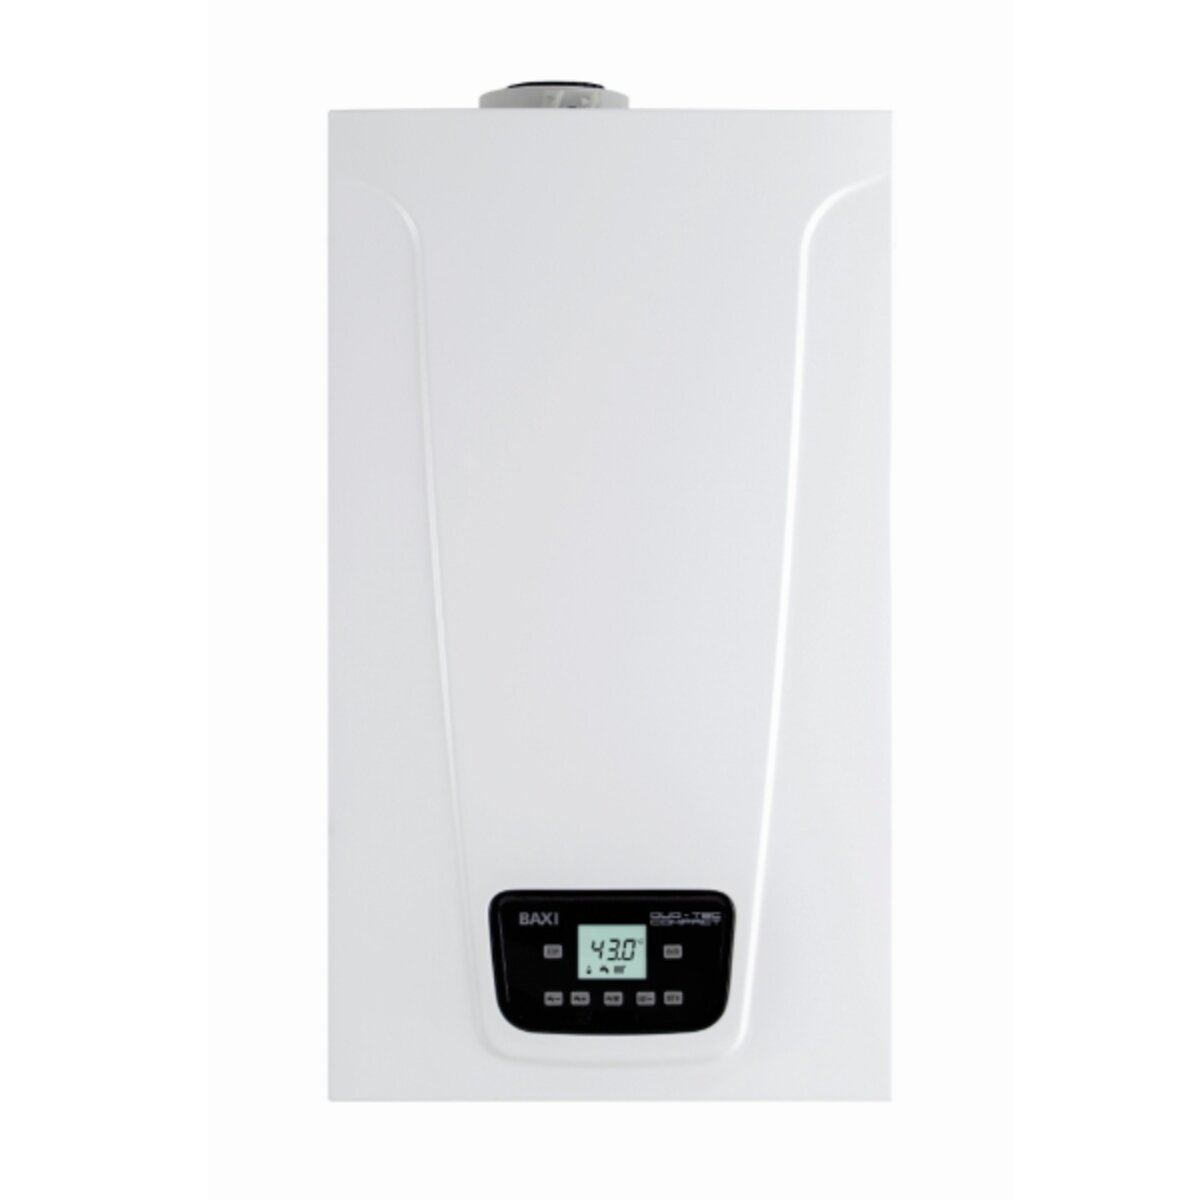 Wall-mounted boiler Baxi duo-tec compact e 28 with condensation sealed chamber 24 kW methane